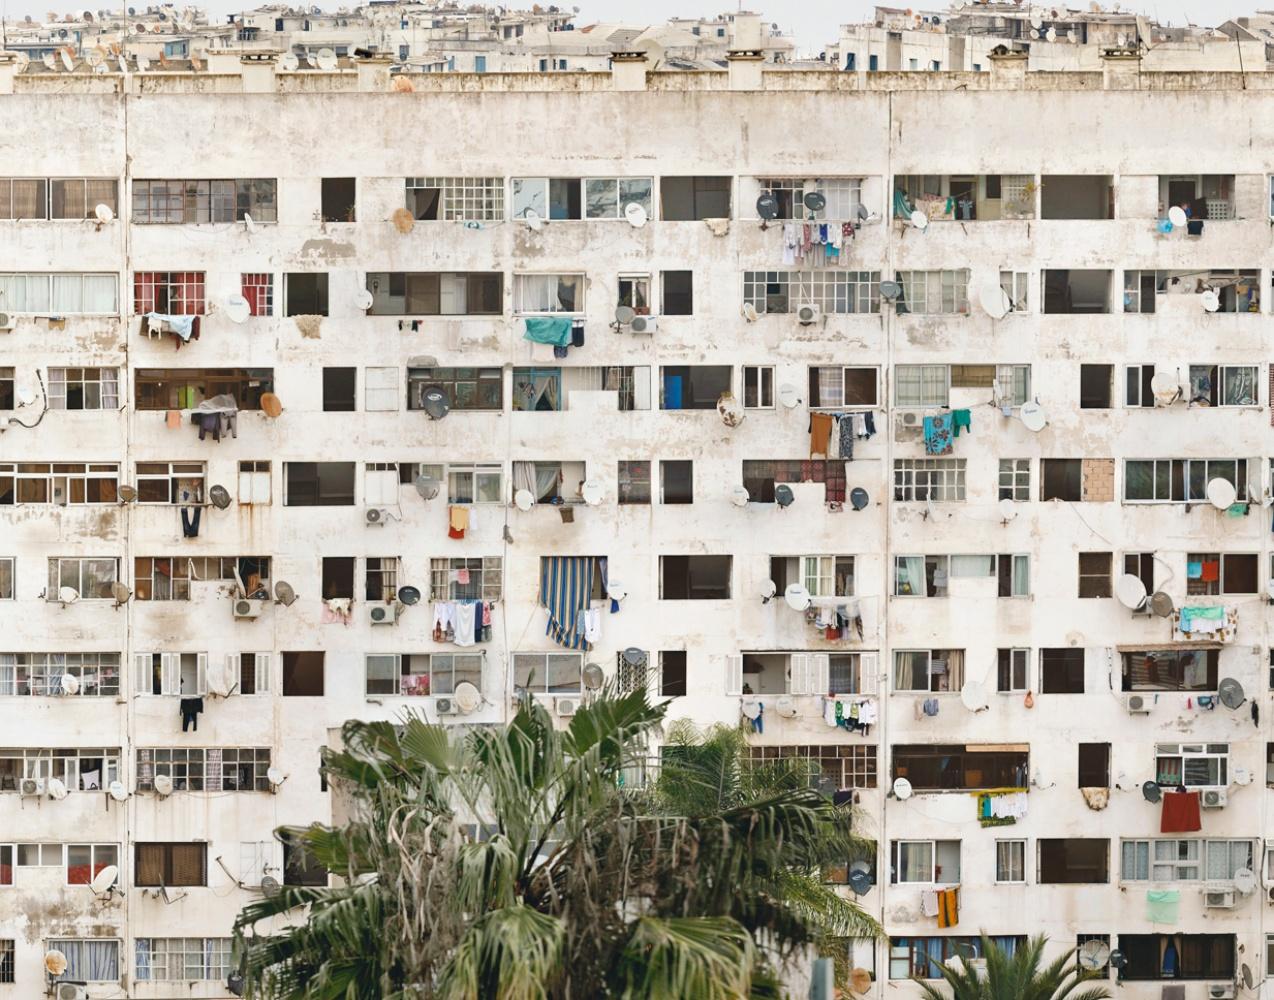 Stéphane COUTURIER (*1957, France)
Alger – Bab El Oued n°2, 2013
C-print with Diasec face in Artist's frame
140 x 300 cm (55 1/8 x 118 1/8 in.)
Edition of 5; Ed. no. 4/5
Framed

Born in 1957 in Neuilly sur Seine, Stéphane Couturier currently lives